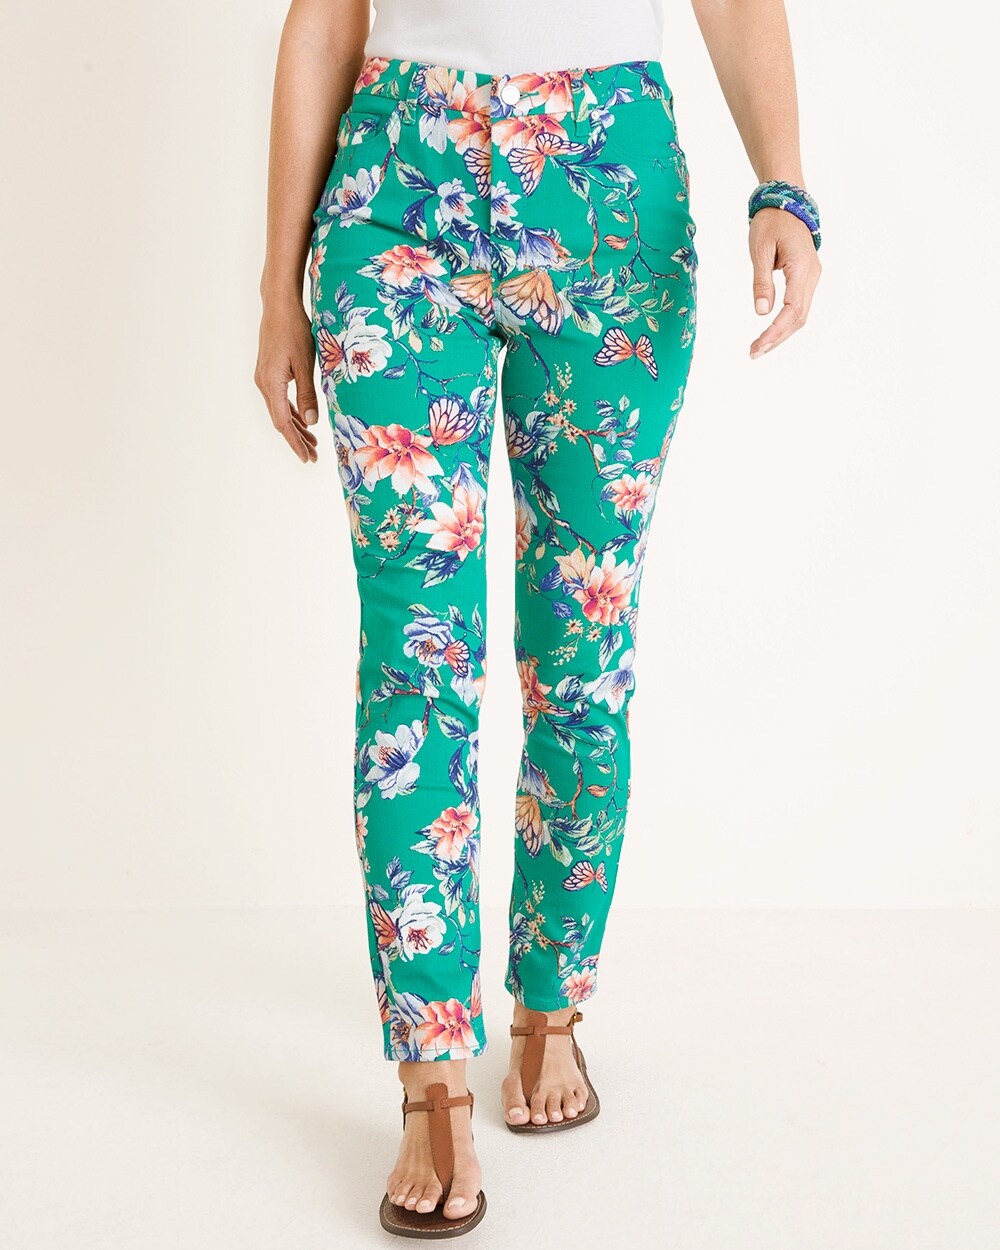 So Slimming Butterfly Garden-Print Ankle Jeans